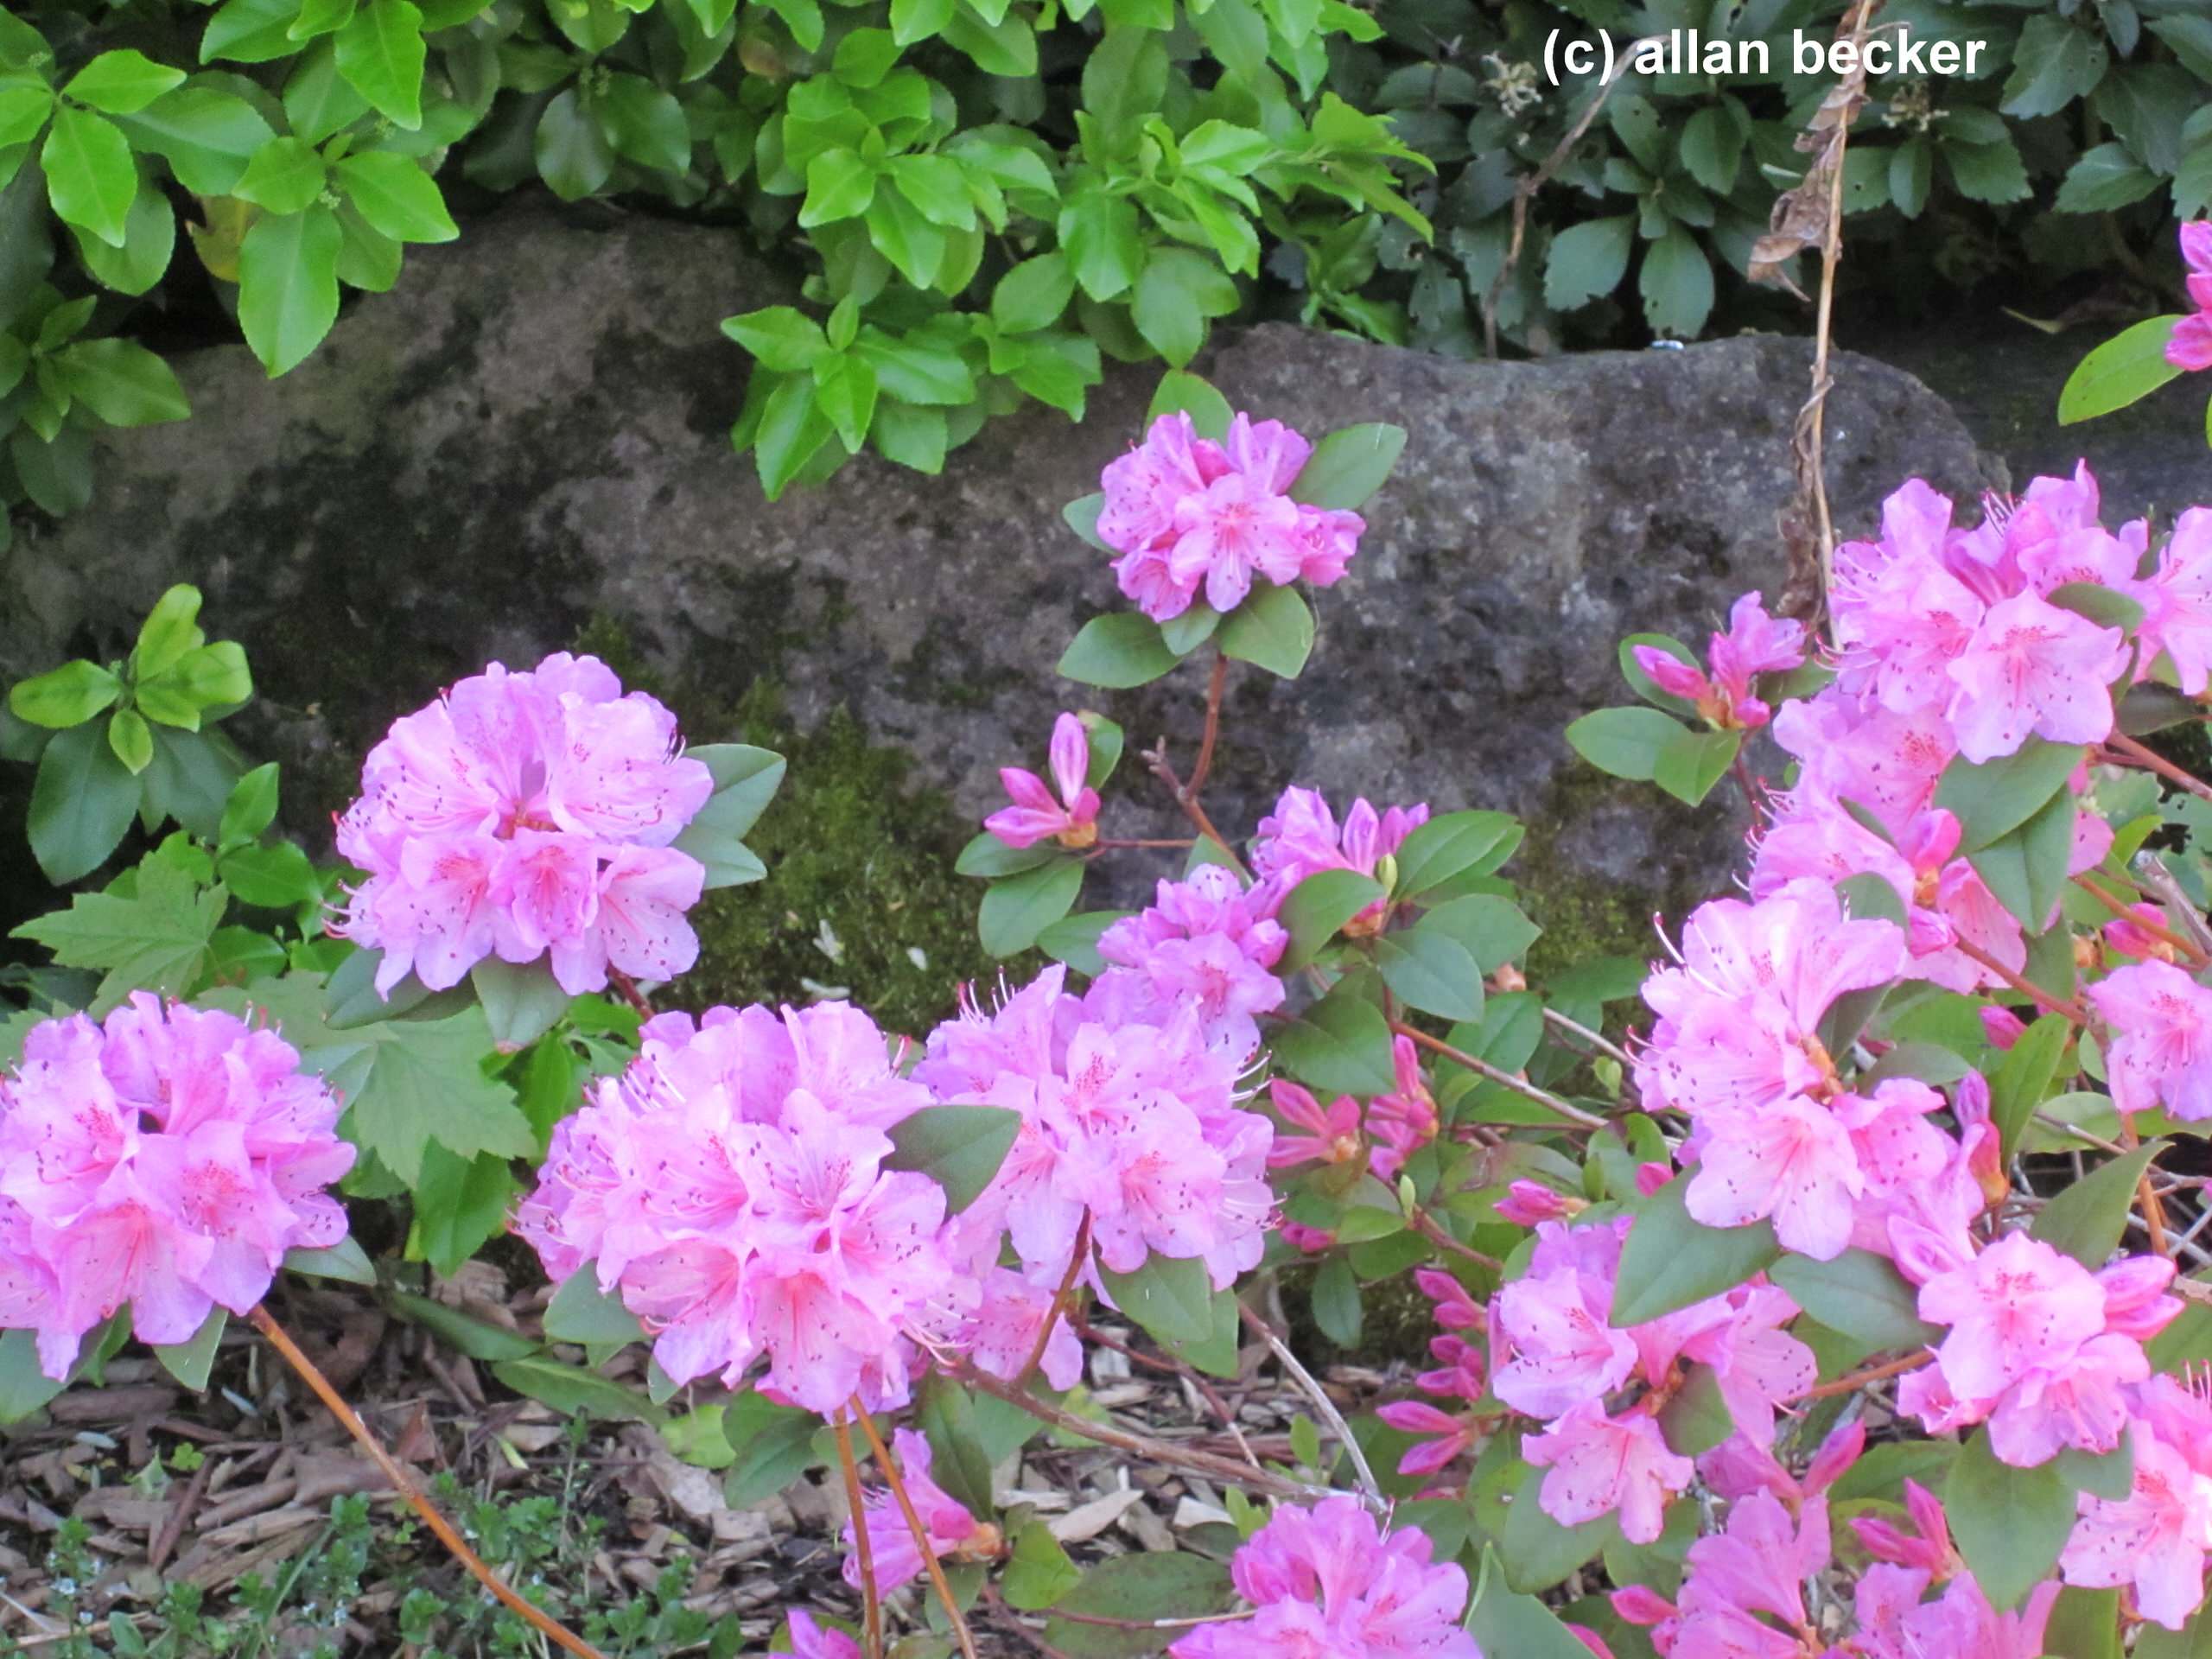 Pink is the favorite color in the flowerbed